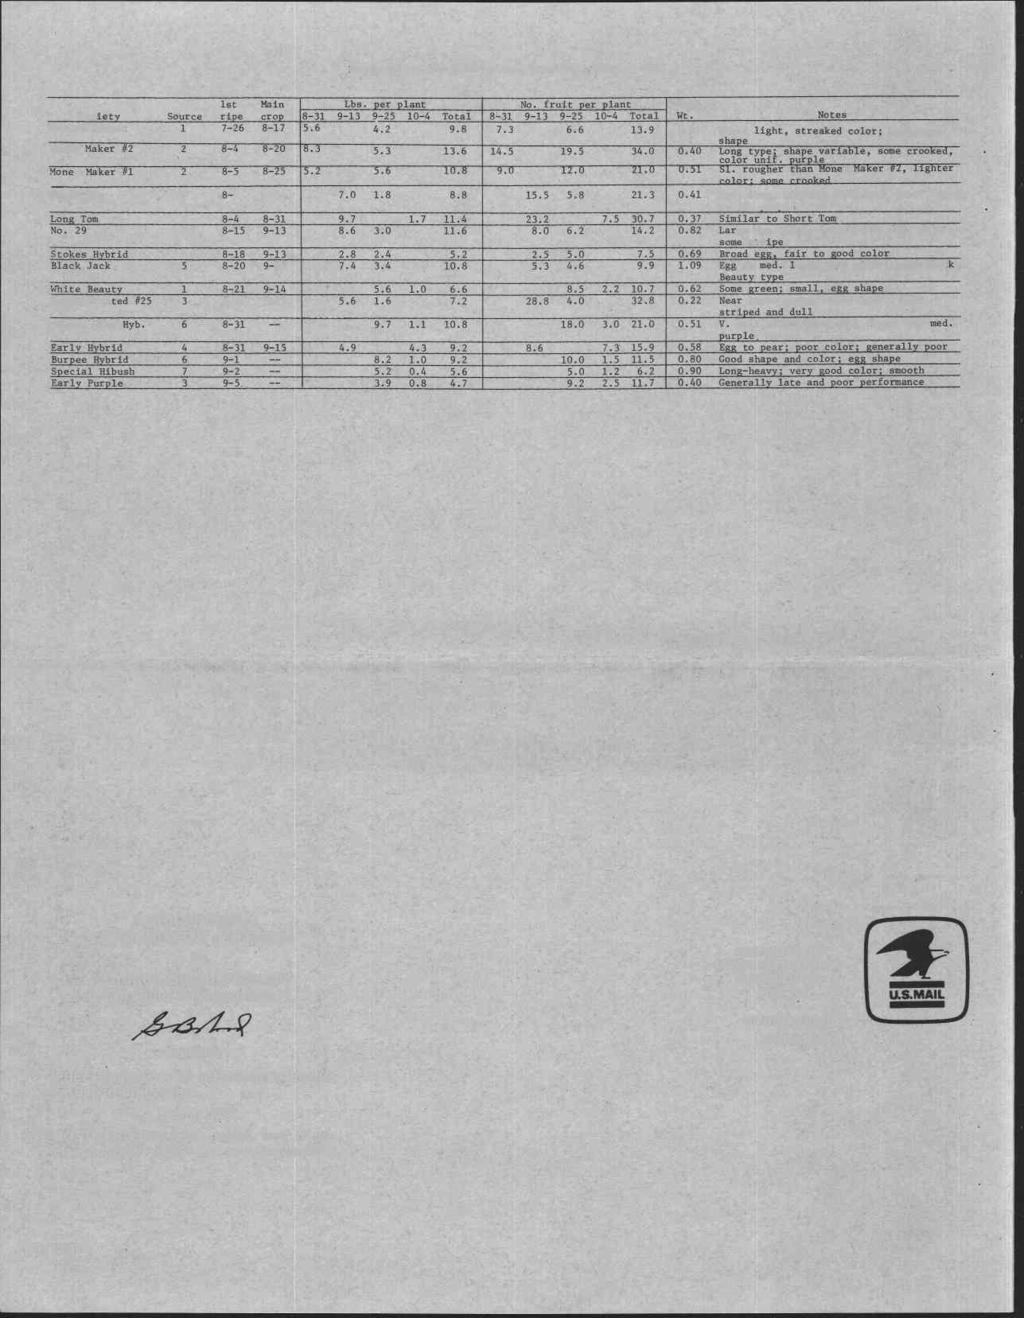 Eggplant Variety Observations, Corvallis, Oregon, 1973 let Main the. per plant No. fruit per plant Avg. Vartety Source ripe crop 8-31 9-13 9-25 10-4 Total 9-31 9-13 9-25 10-A Total Wt.